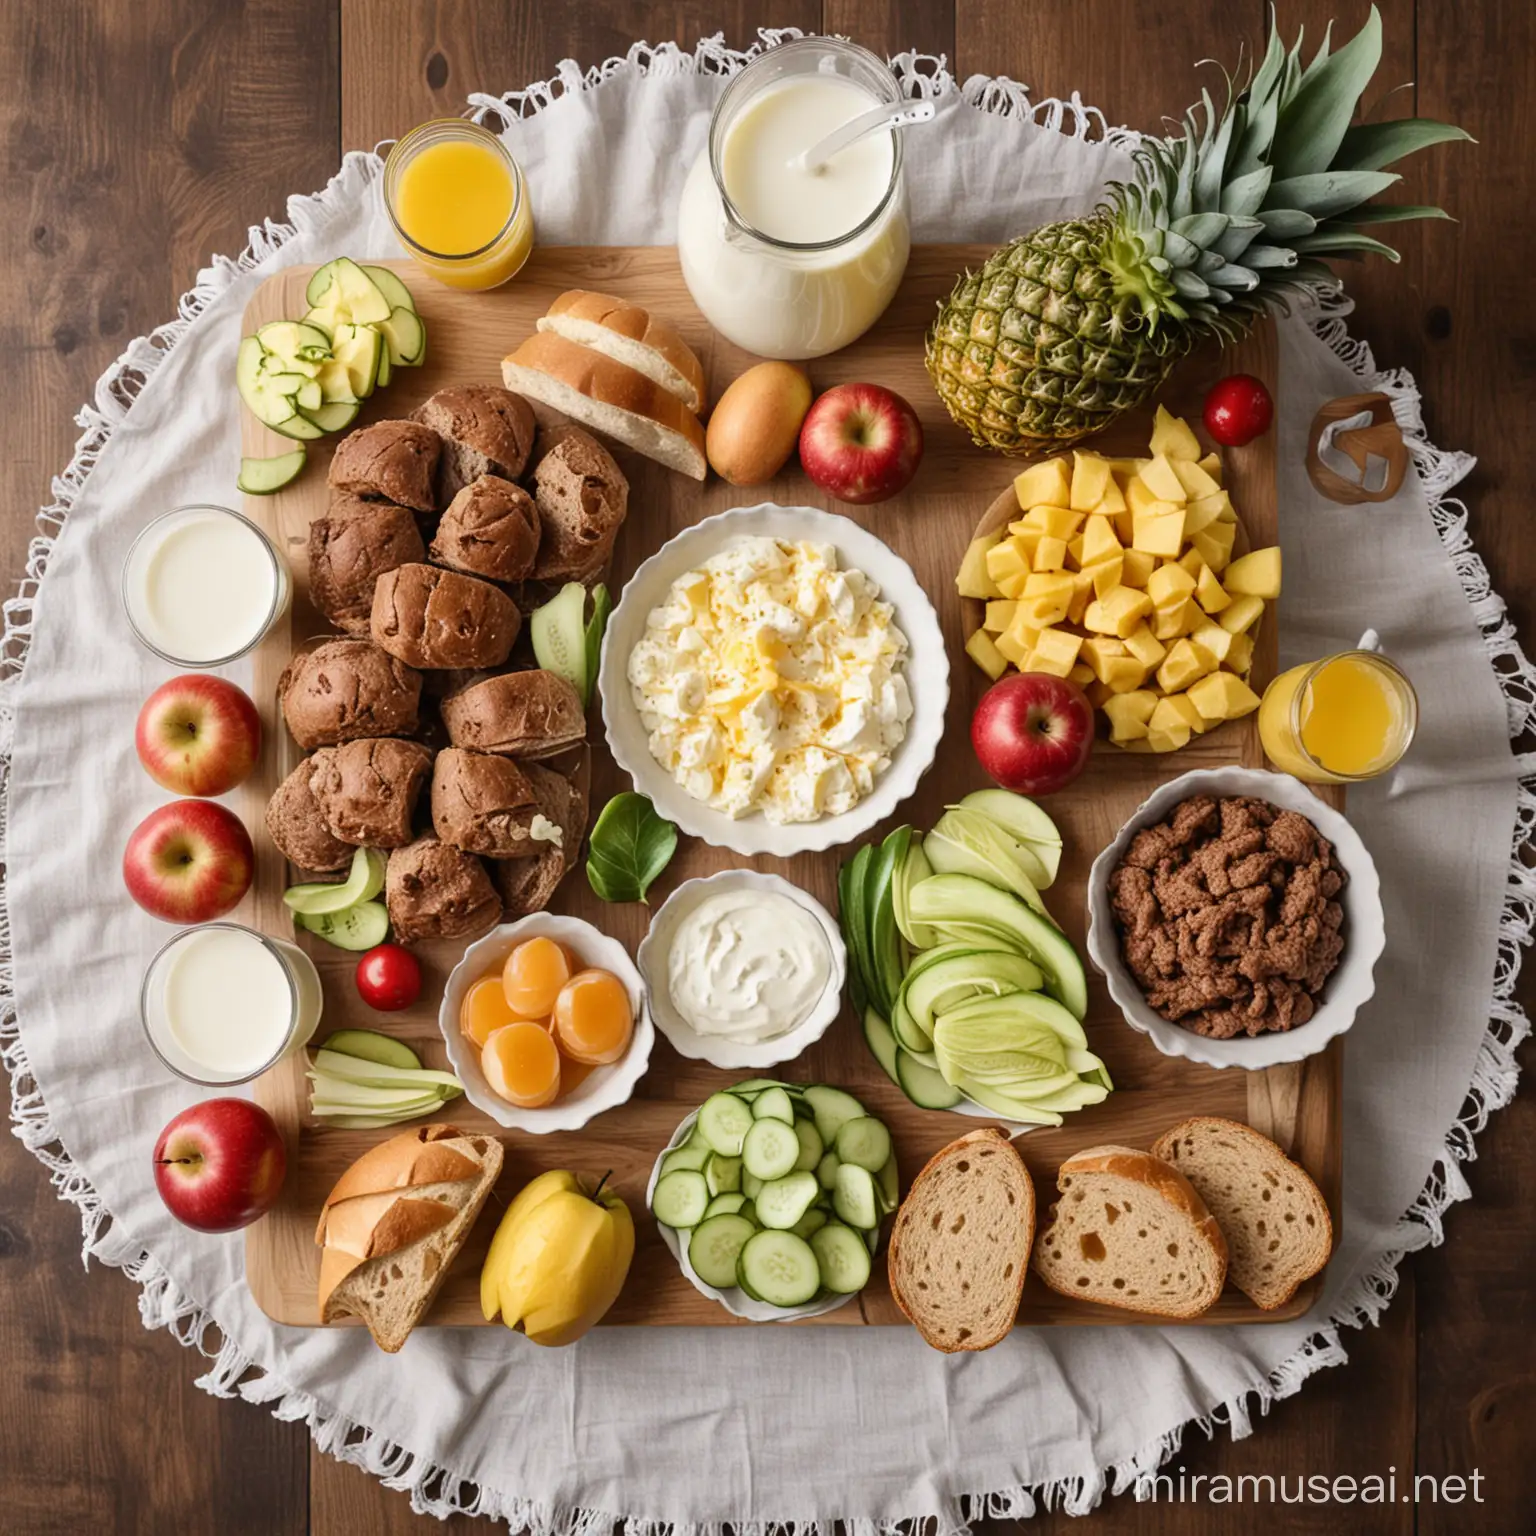 A table with such food: apples, pineapple, sour cream, milk, cheese, bread, beef, eggs, cucumber, cabbage, jam, water